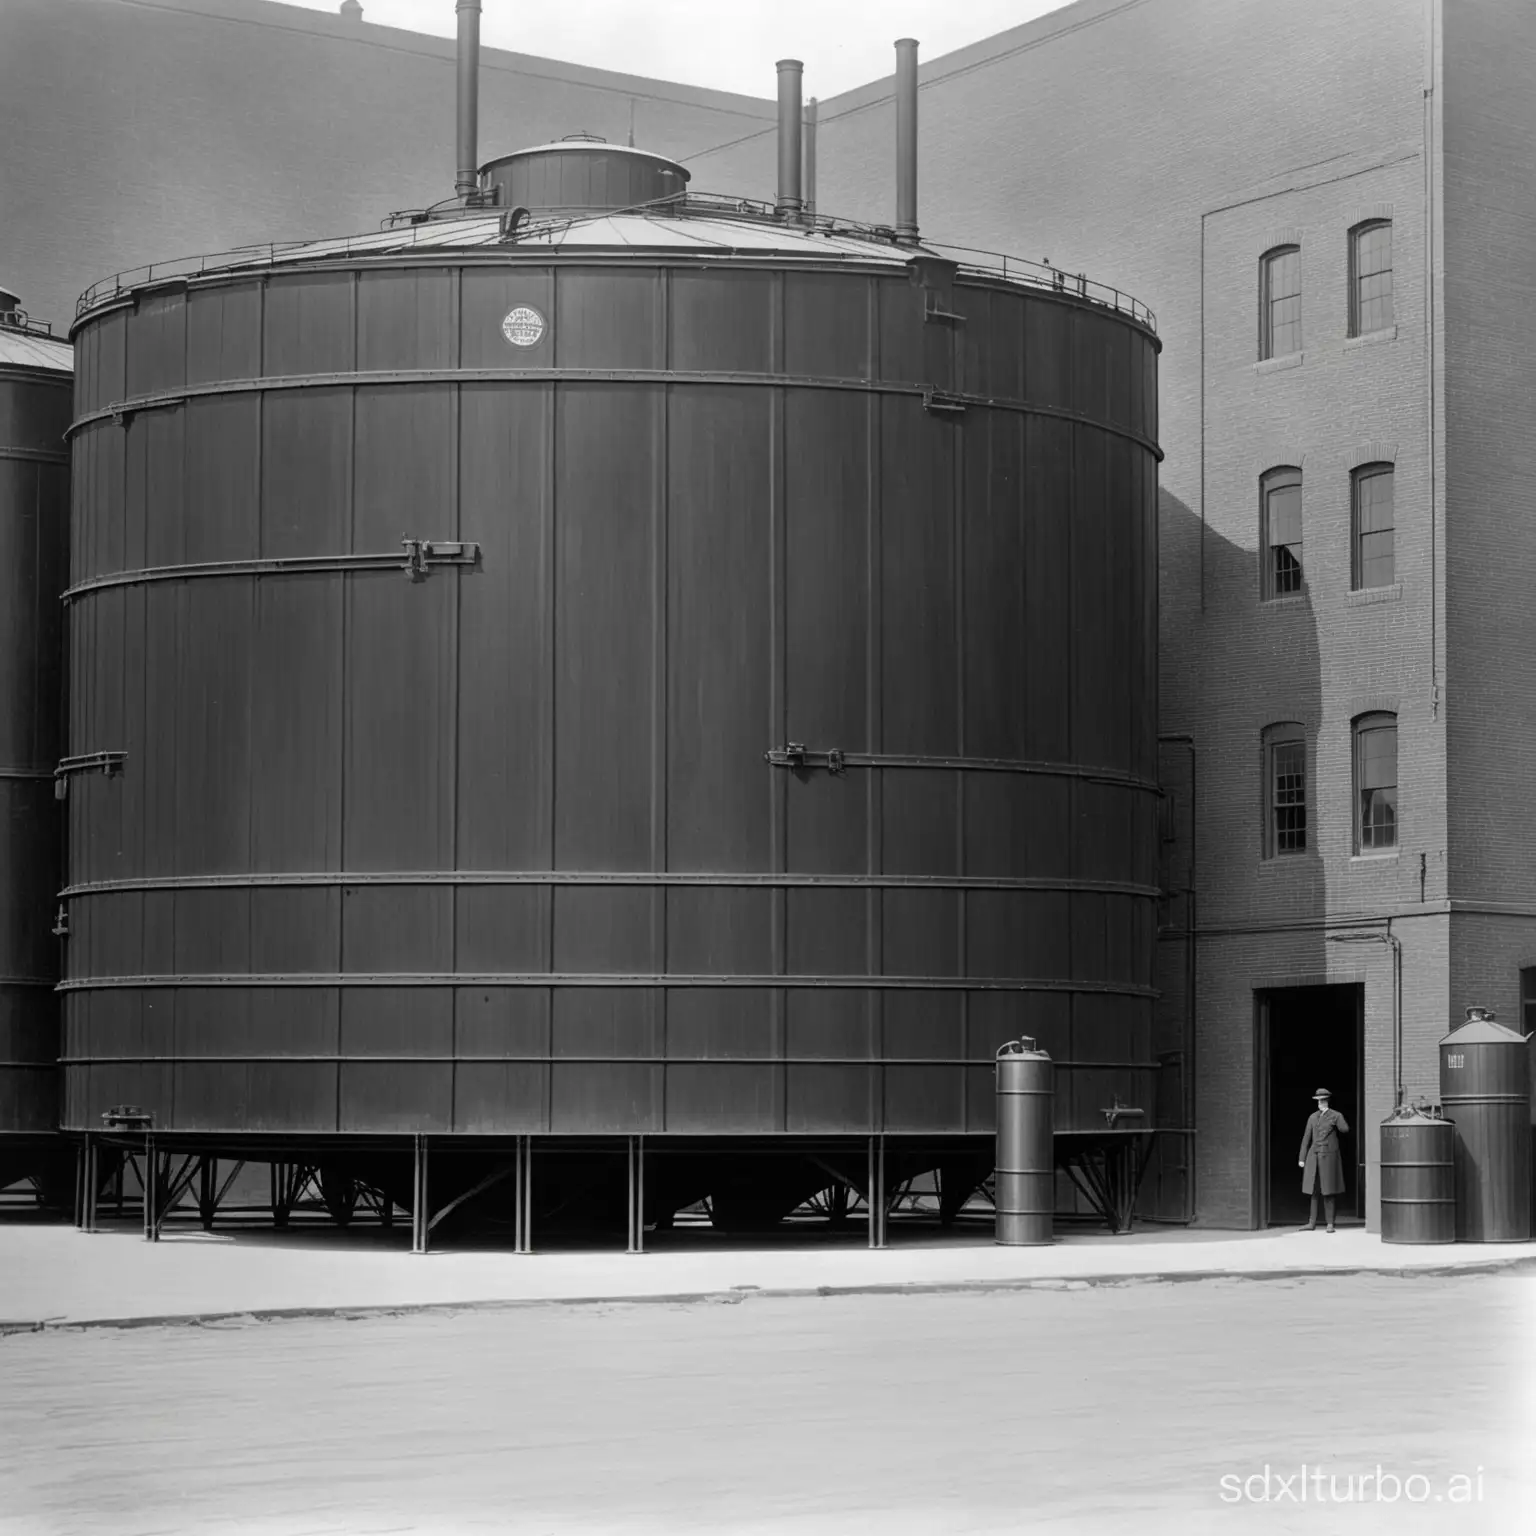 [The camera pans to a large tank labeled "Purity Distilling Company - Molasses Storage" outside in 1919 year